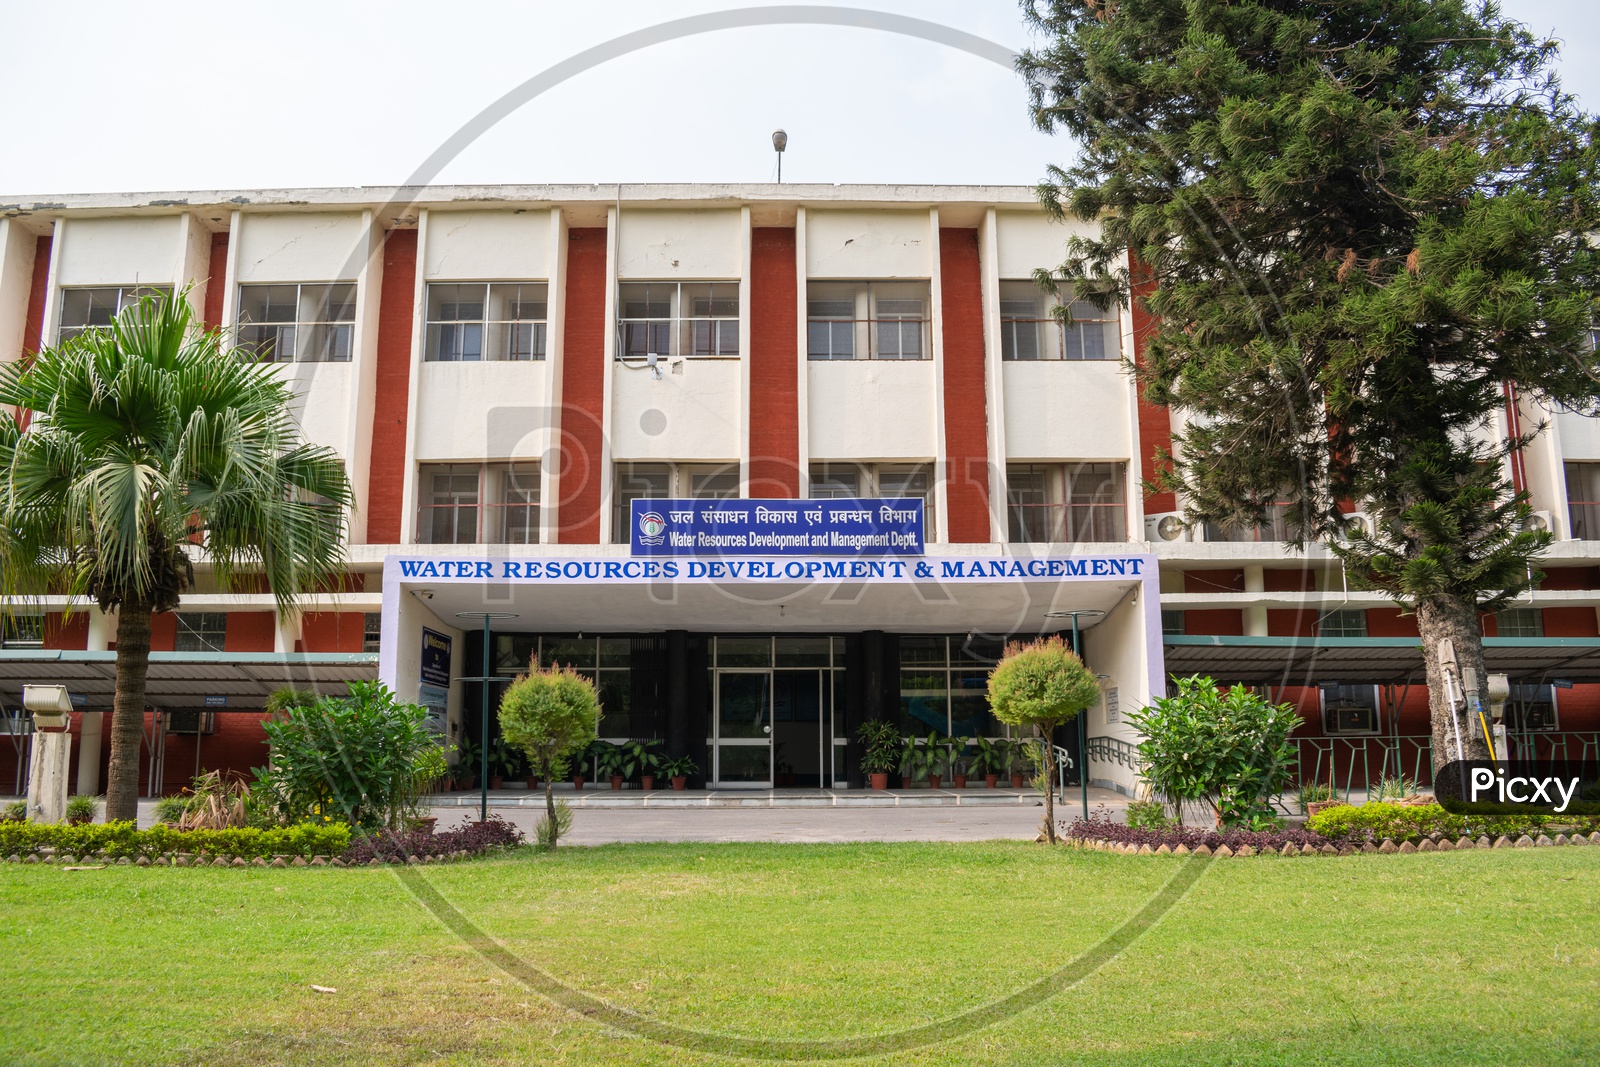 Department of Water Resources Development and Management, Indian Institute of Technology Roorkee(IIT Roorkee)